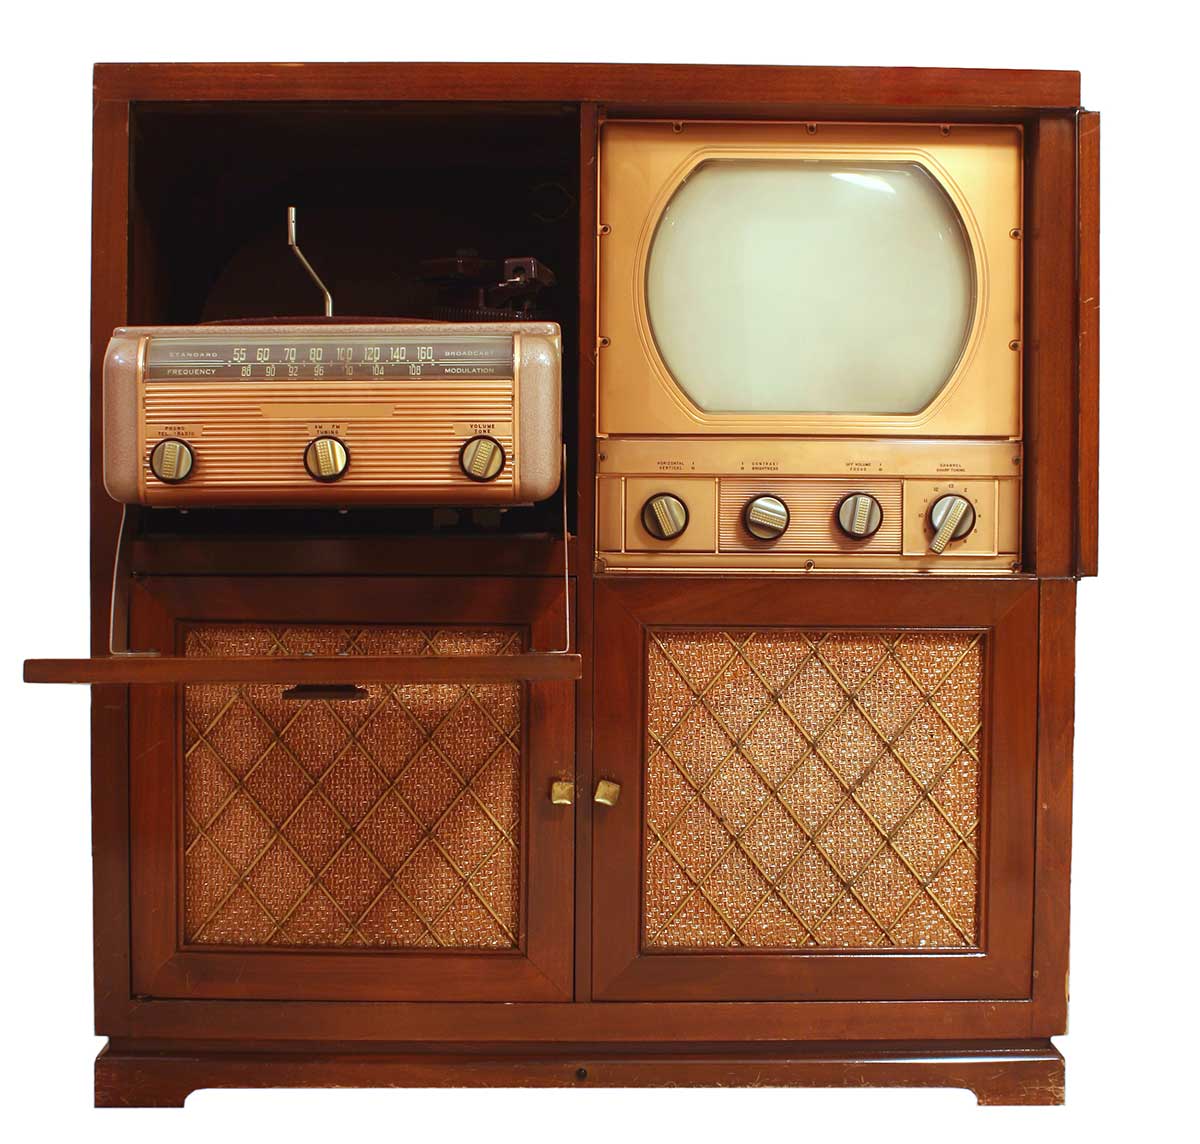 watching tv from your own little private screen that would fit in the palm of your hand was 100% unthinkable!